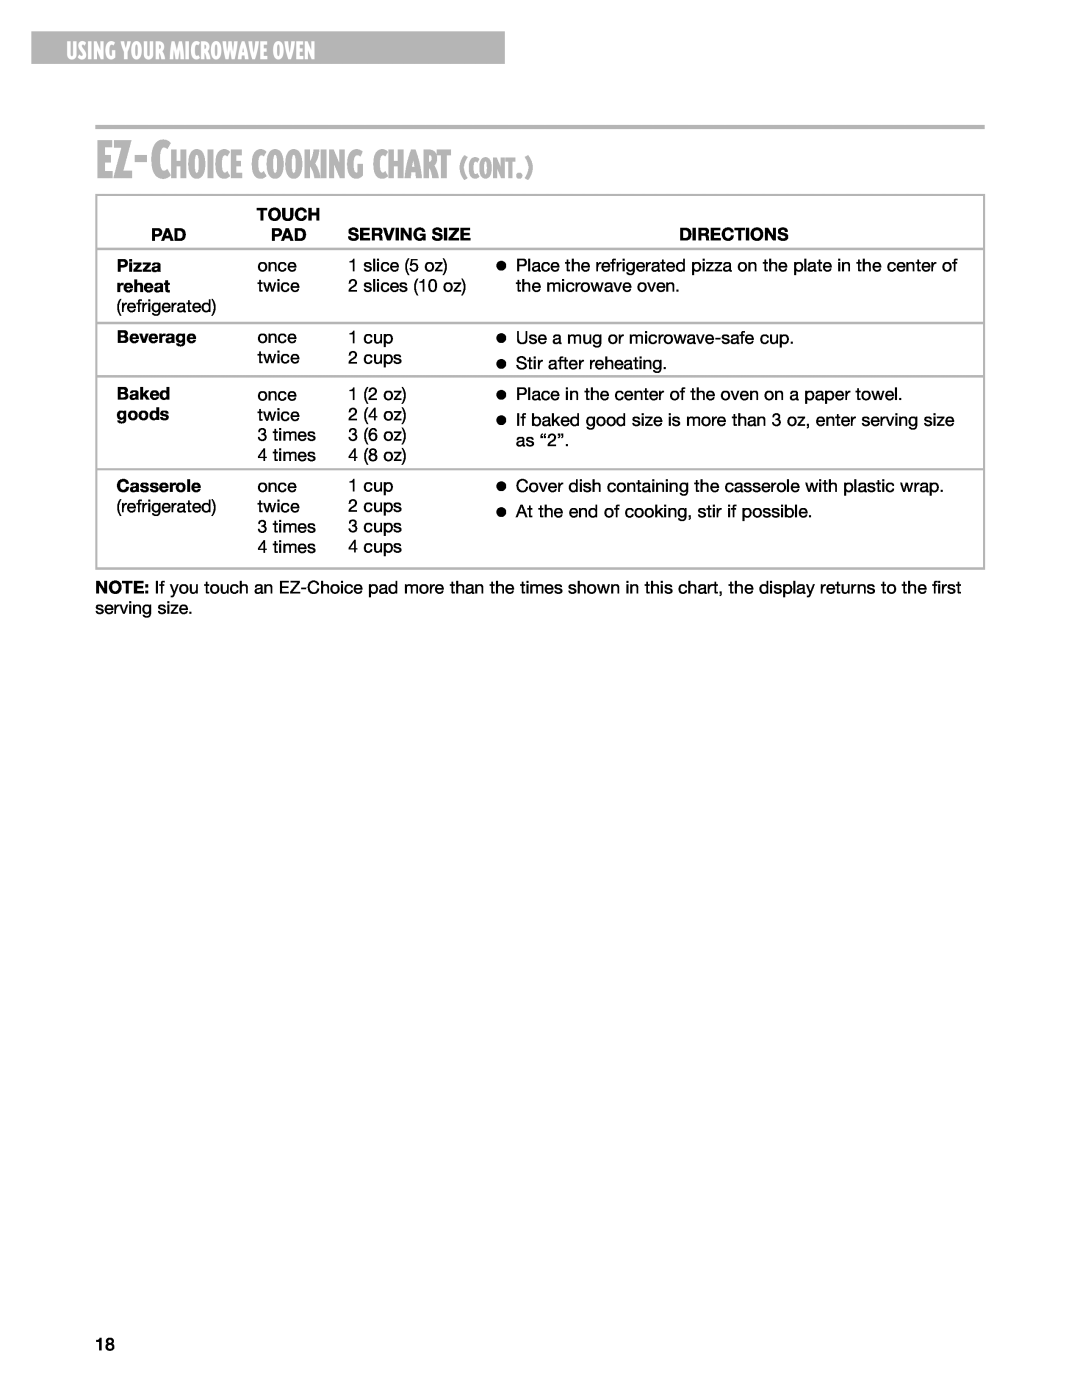 Whirlpool MT1078SG, MT1071SG installation instructions Ez-Choicecooking Chart Cont, Using Your Microwave Oven 